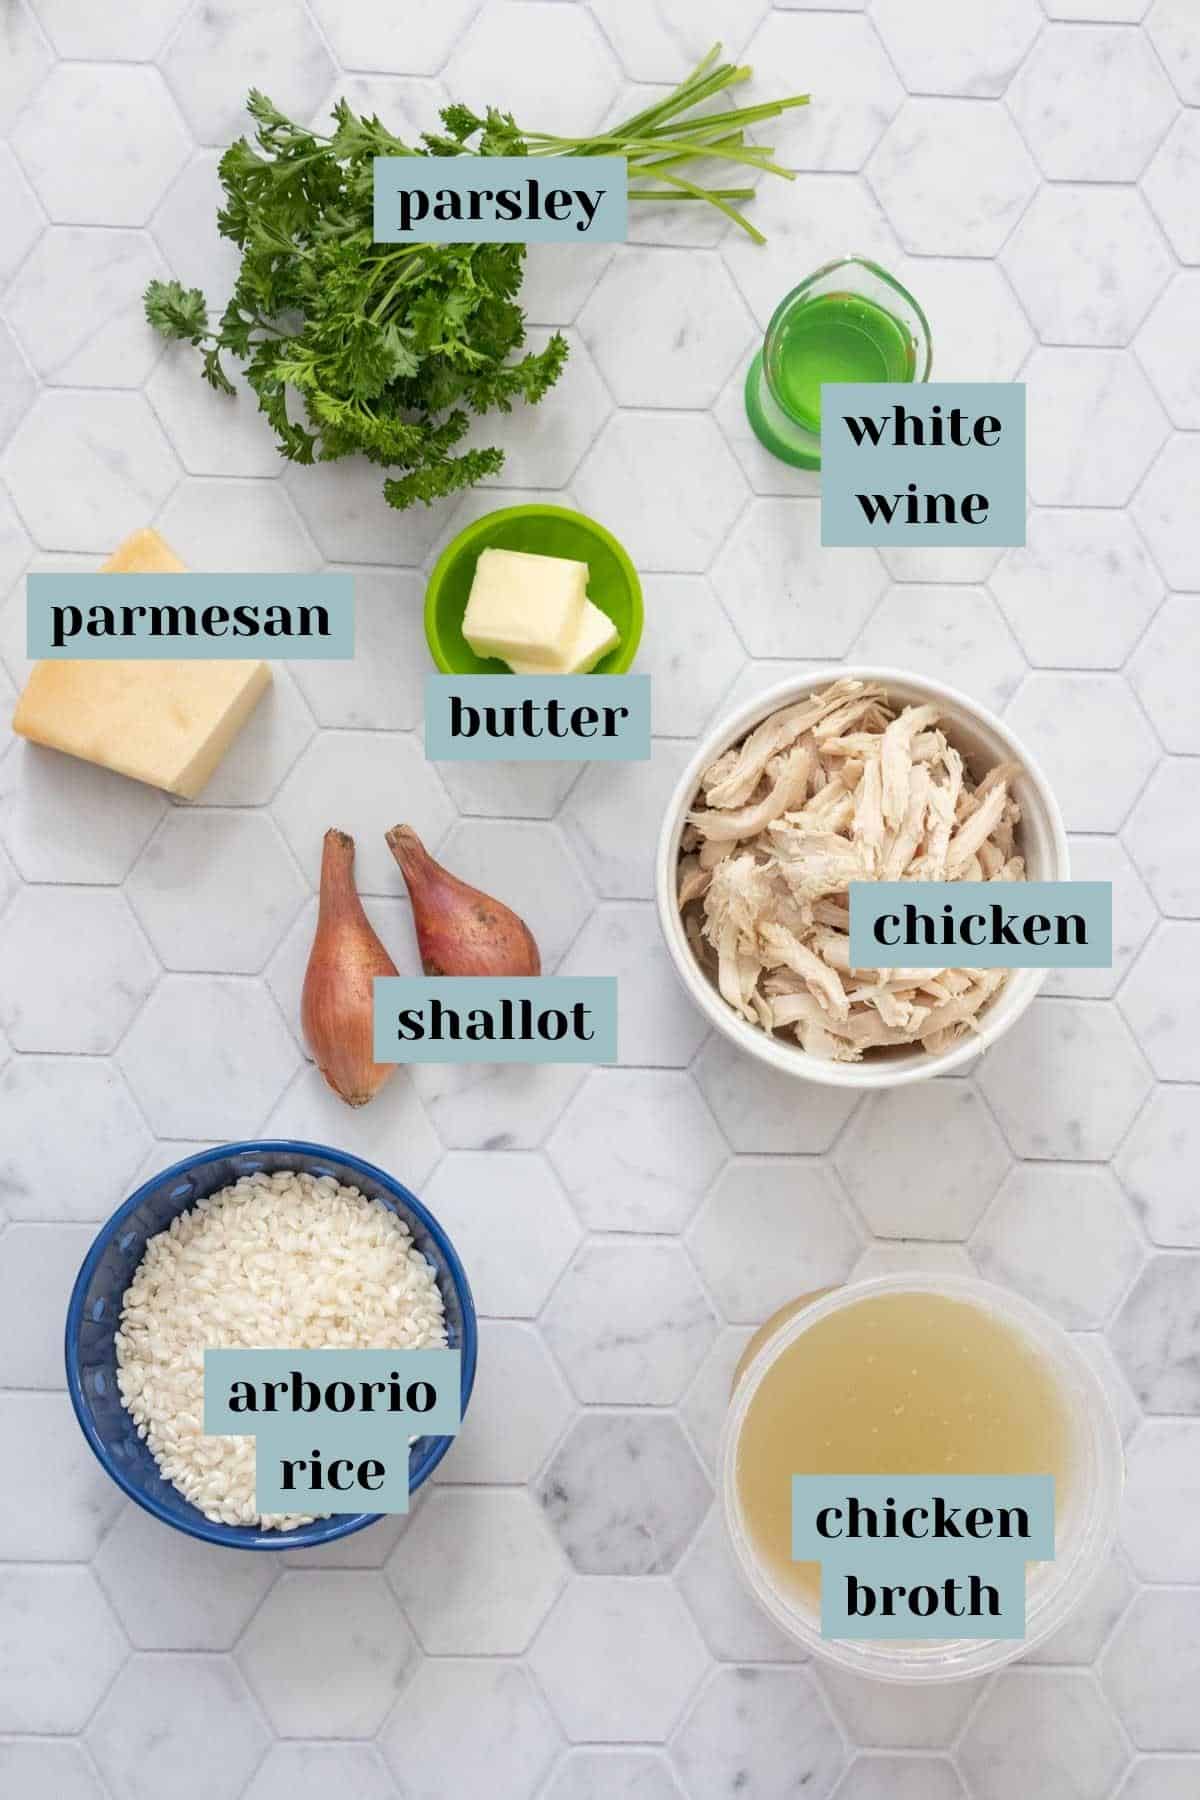 Ingredients for chicken risotto on a tile surface with labels.